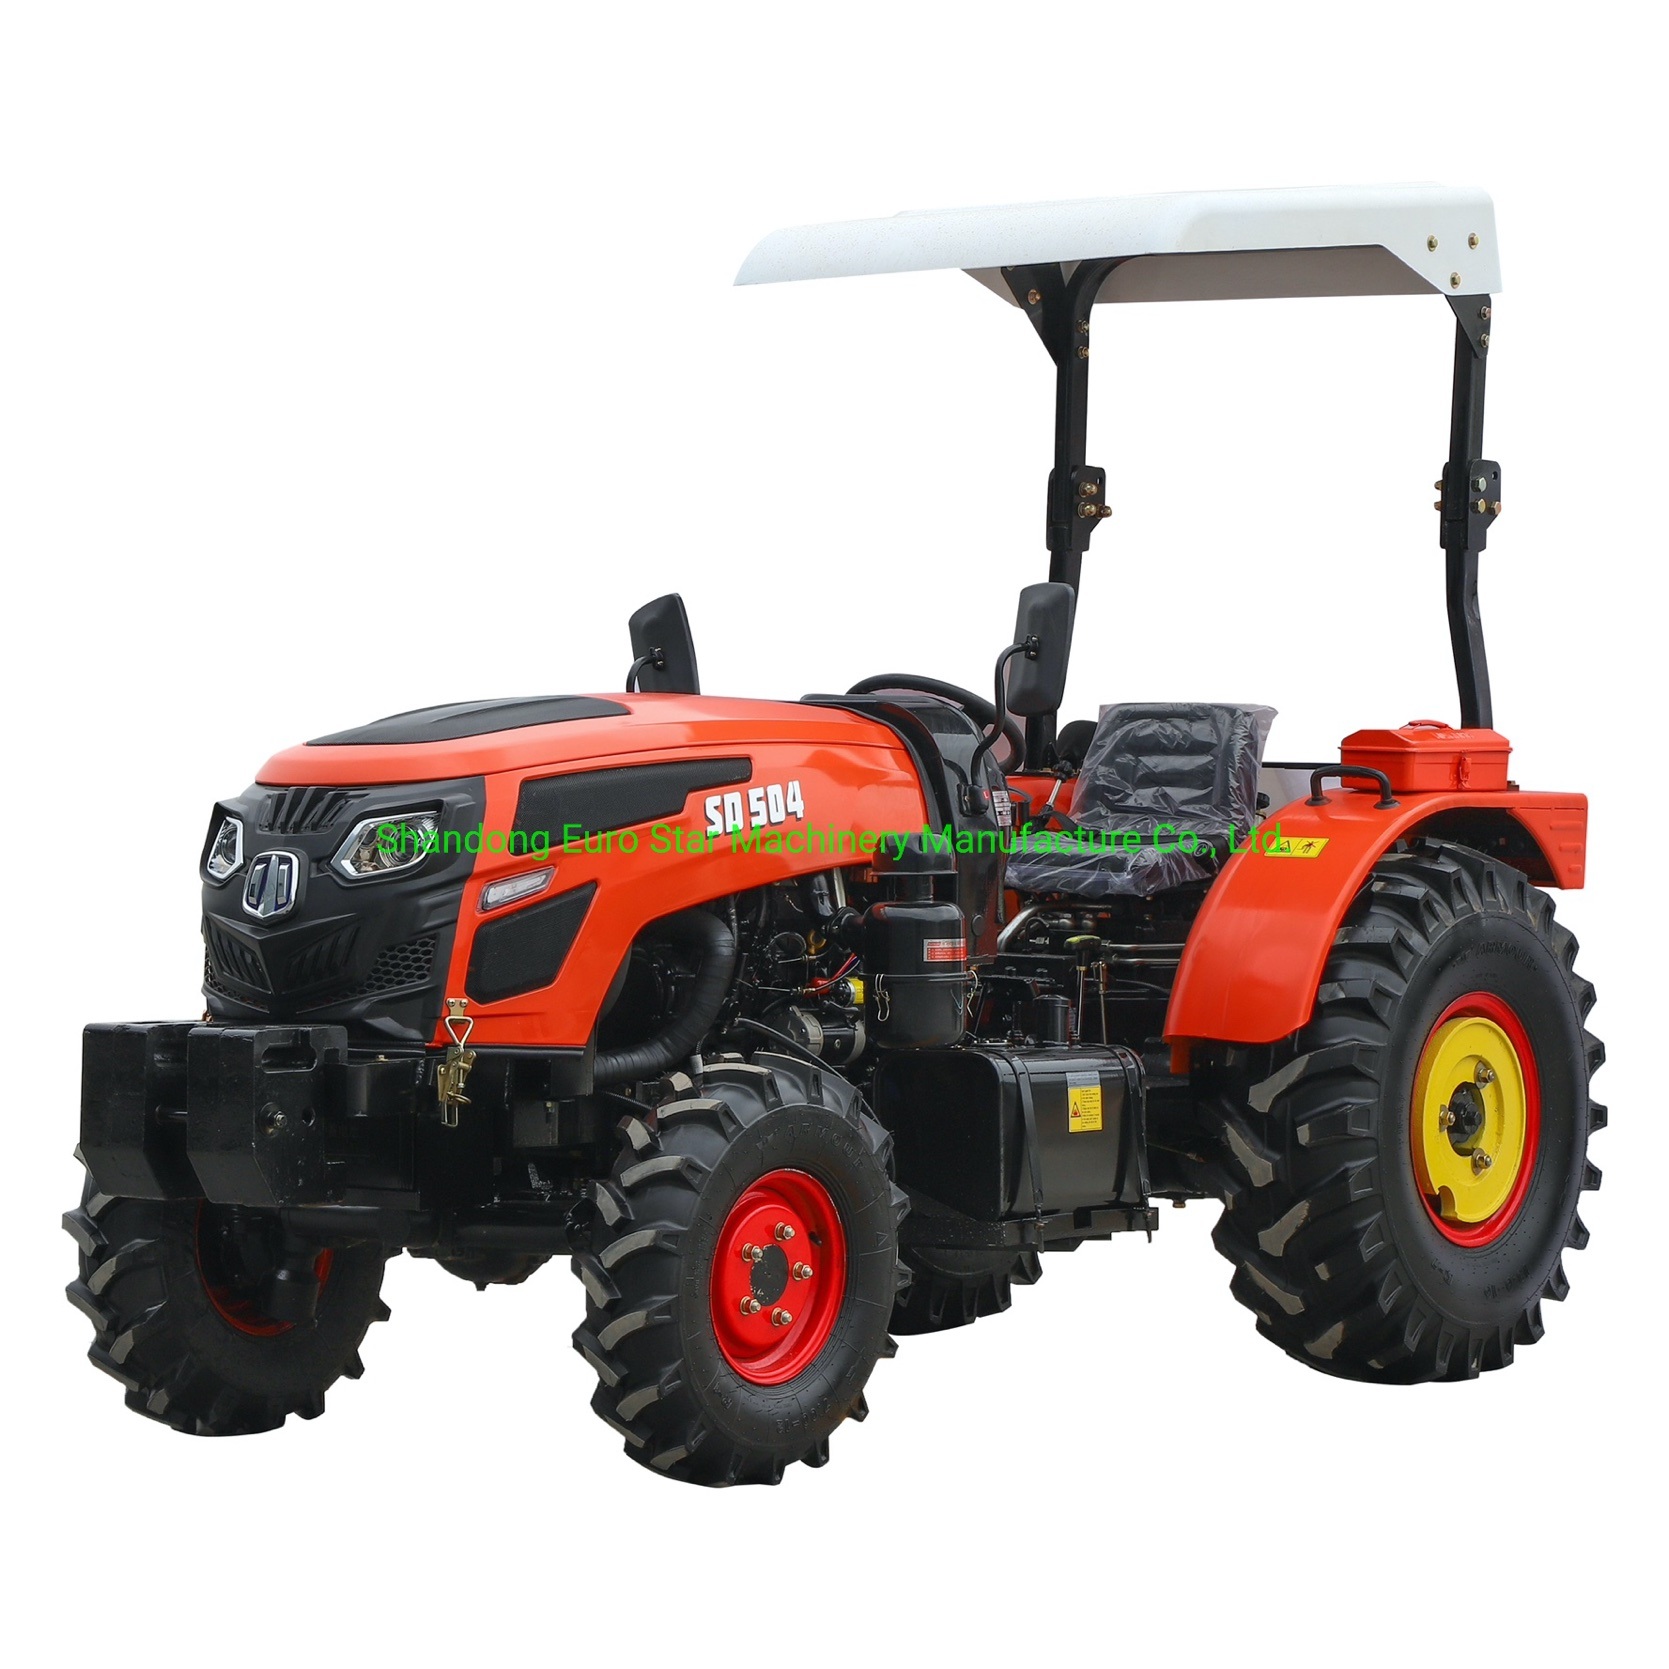 De-40HP-50HP-60HP-China-Agricultural-Machinery-Manufacturer-4WD-Small-Compact-Garden-Cheap-Wheel-Mini-Farm-Tractor-with-Front-End-Loader-and-Backhoe (5).jpg